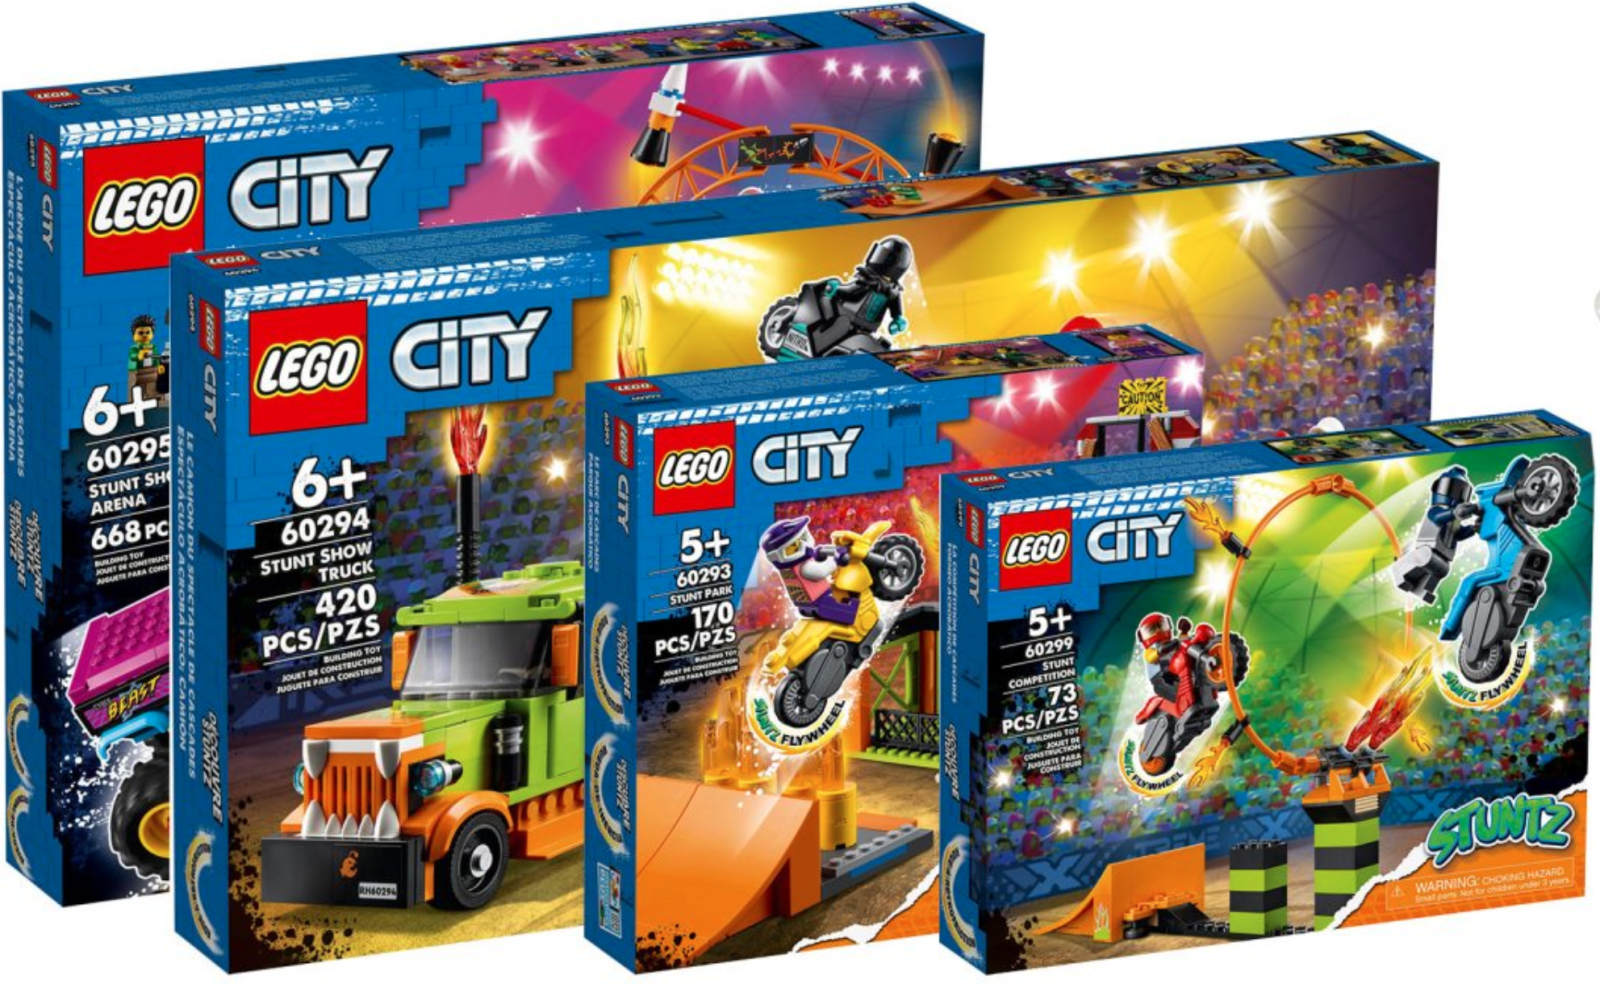 The first-ever LEGO City Stunt Show tour is coming to Manchester this weekend, The Manc